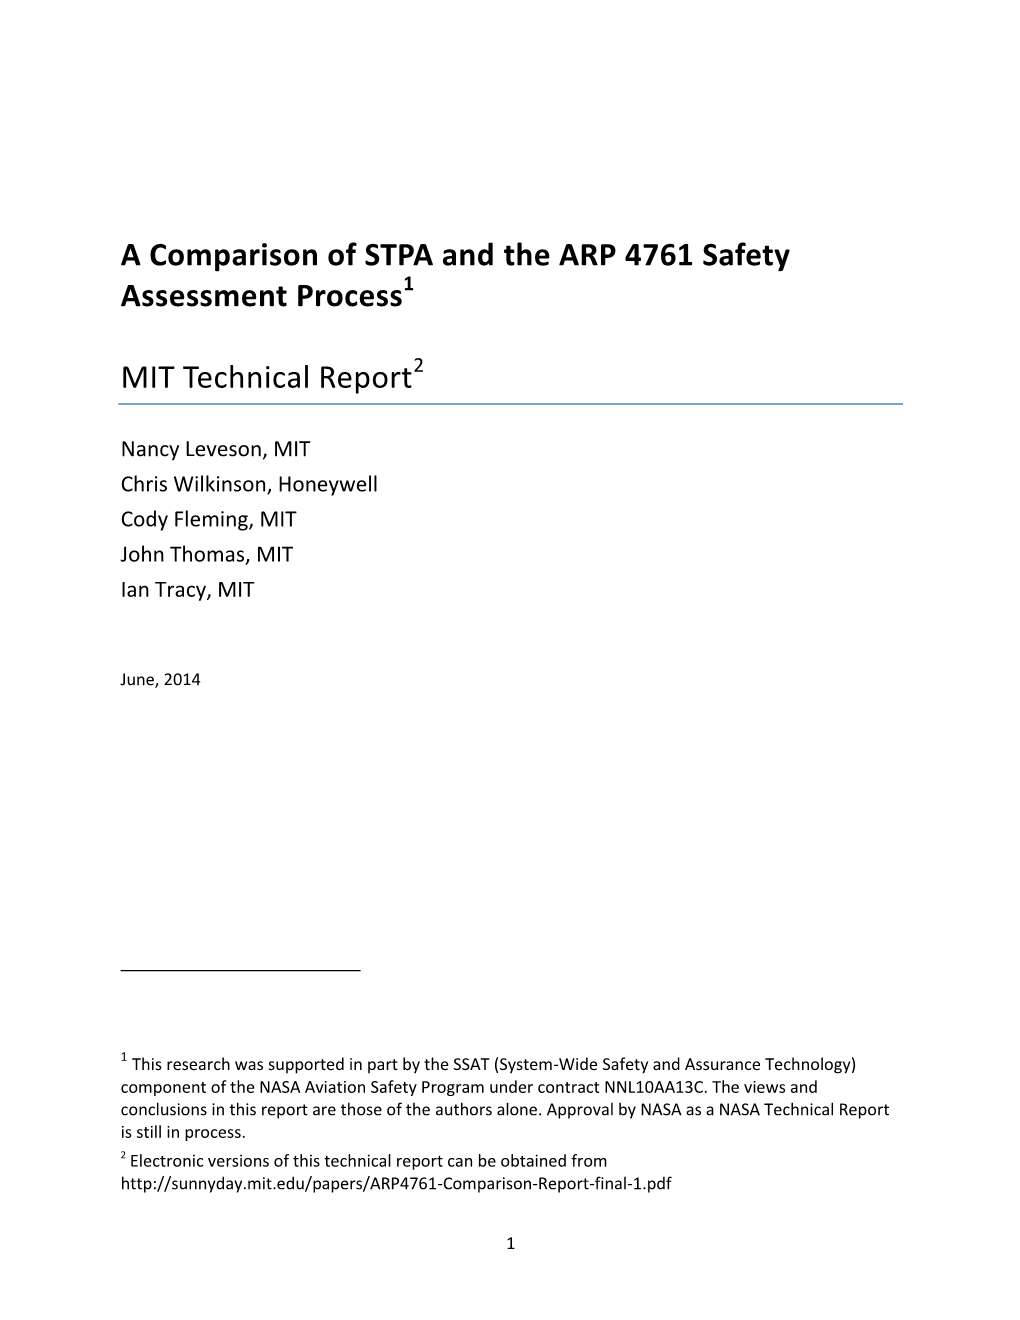 A Comparison of STPA and the ARP 4761 Safety Assessment Process1